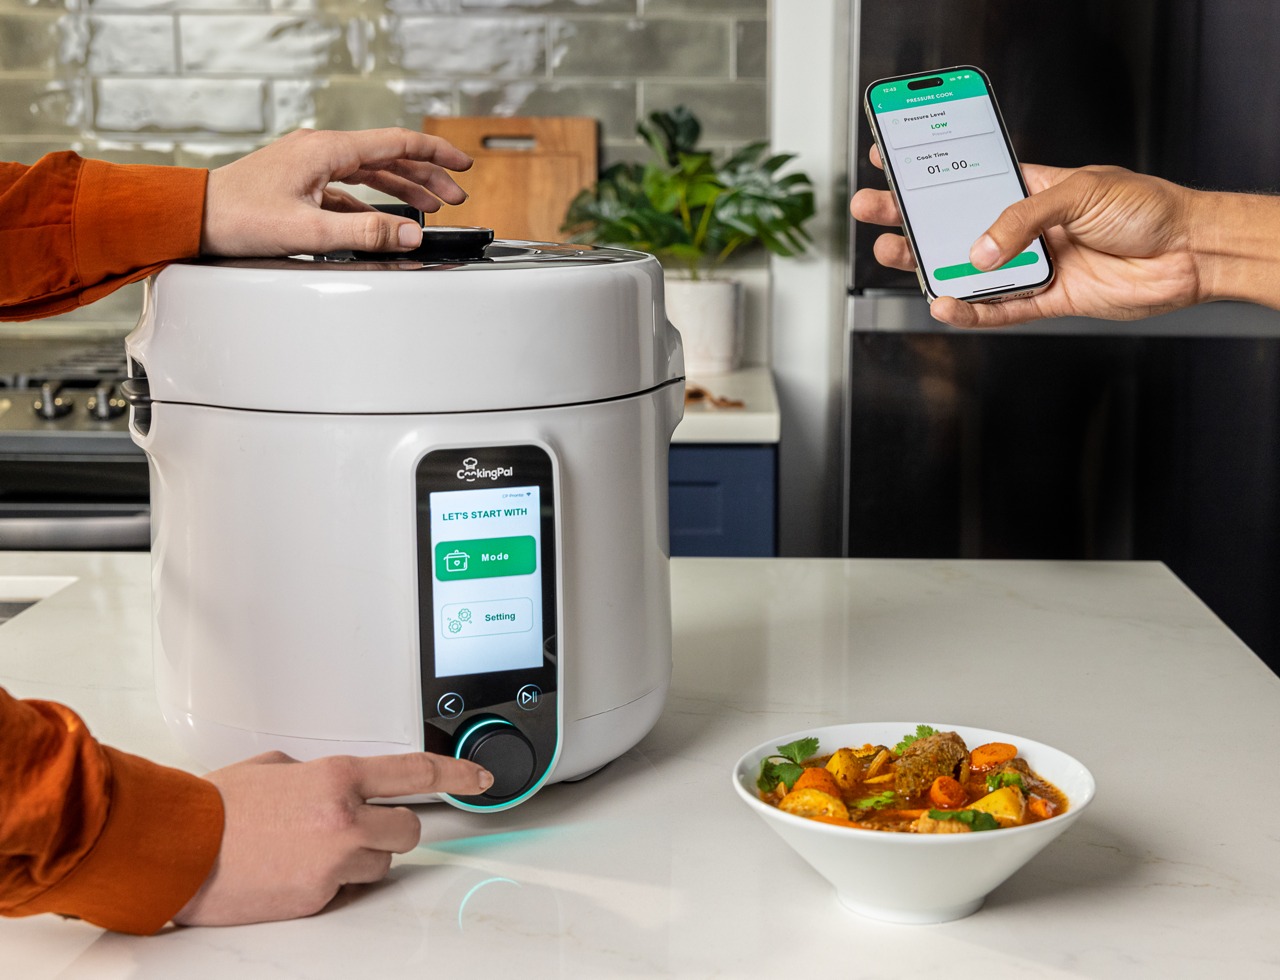 https://www.yankodesign.com/images/design_news/2023/02/this-modular-kitchen-appliance-does-the-job-of-a-weighing-scale-pressure-cooker-saucepan-and-air-fryer/this_smart_pressure_cooker_and_air_fryer_is_a_powerhouse_08.jpg